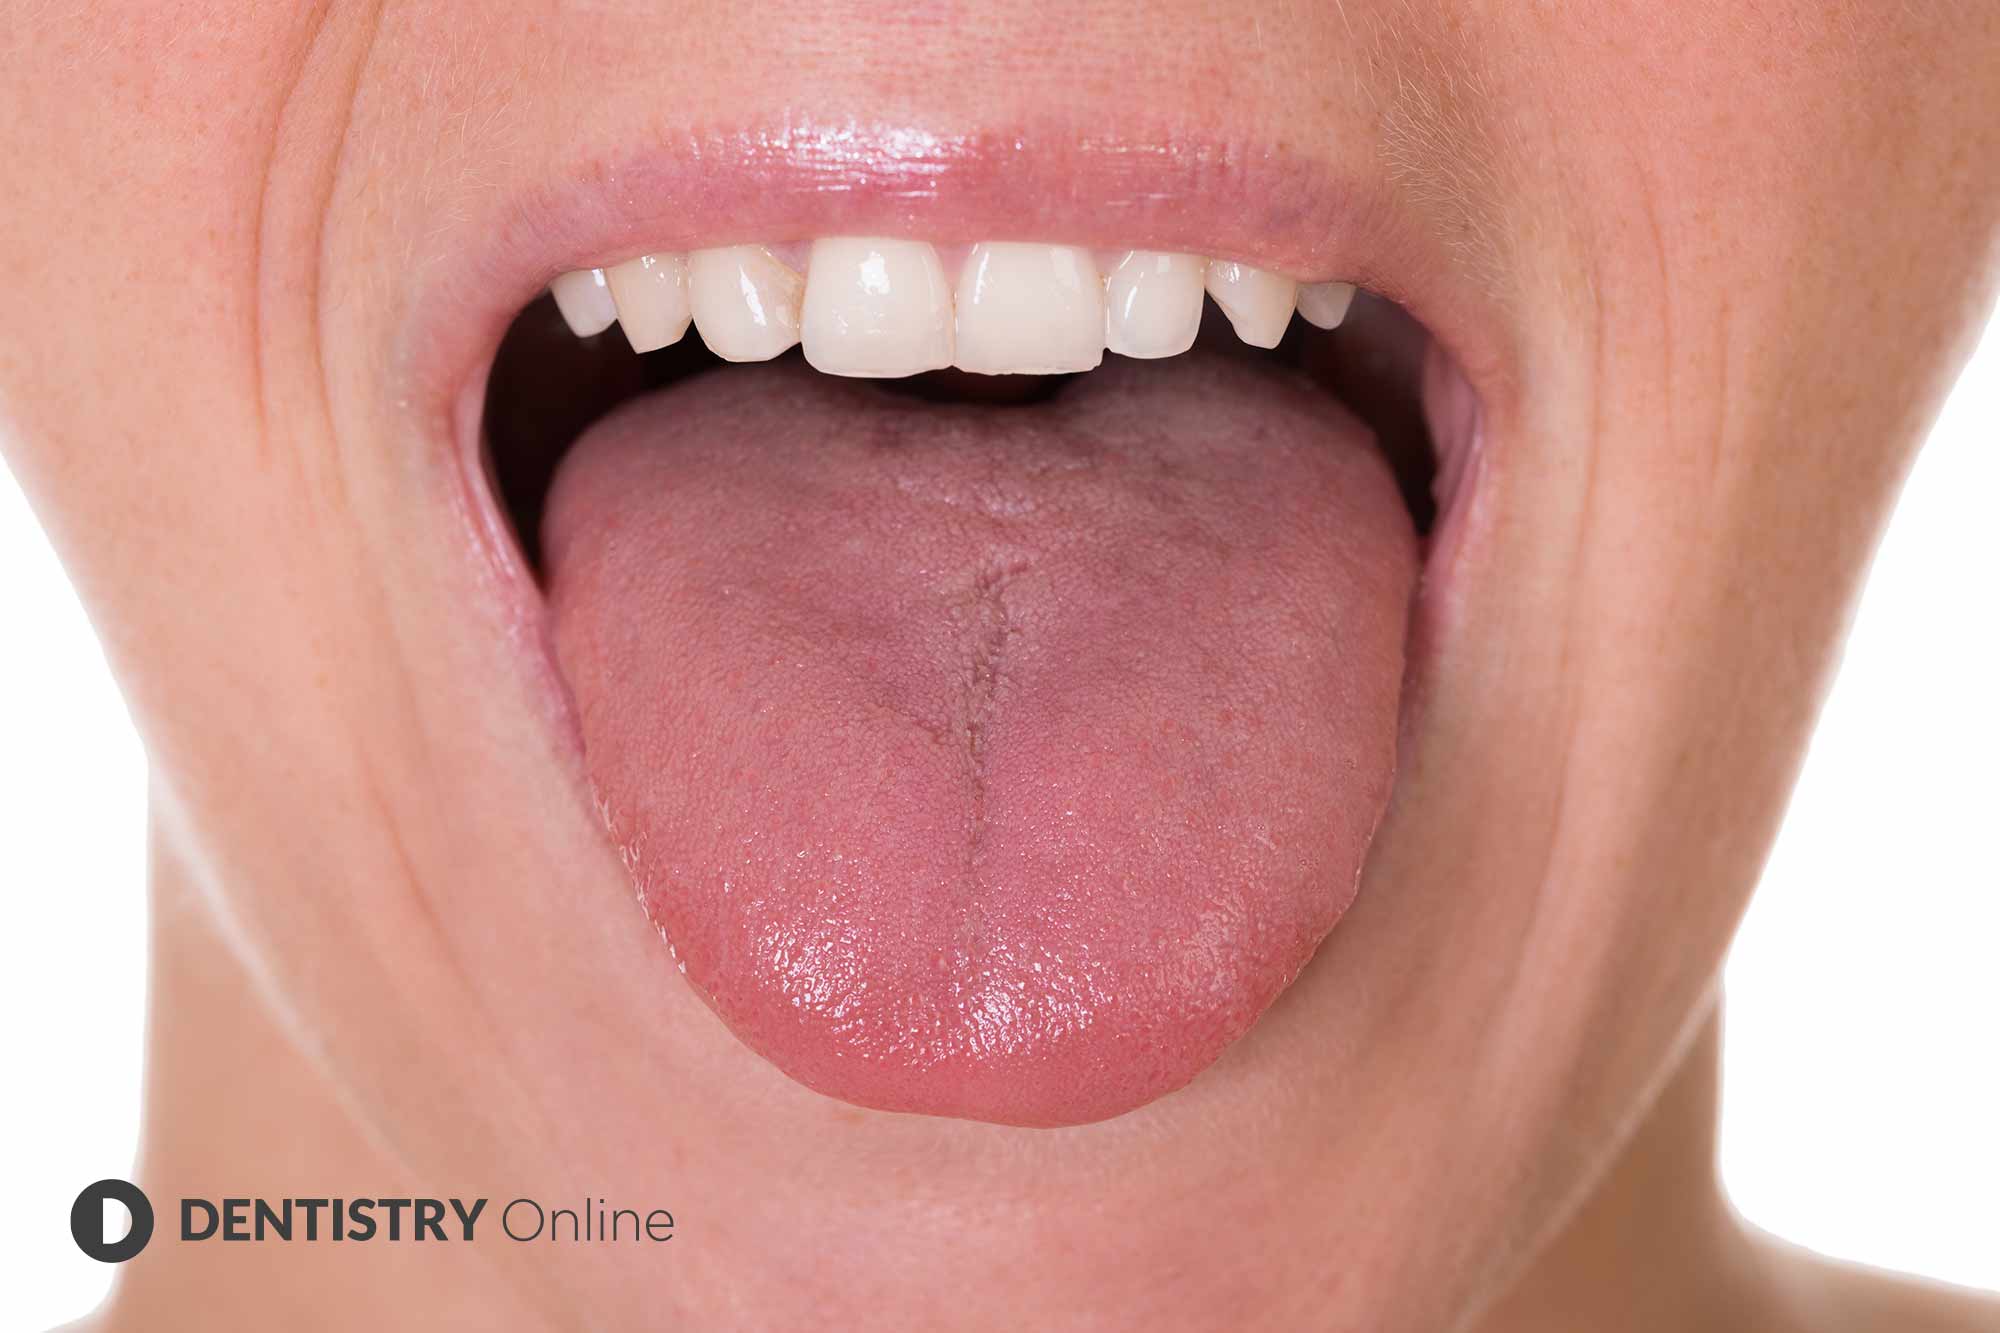 Increasing cases of 'COVID tongue' are being seen in coronavirus positive patients, according to a health expert